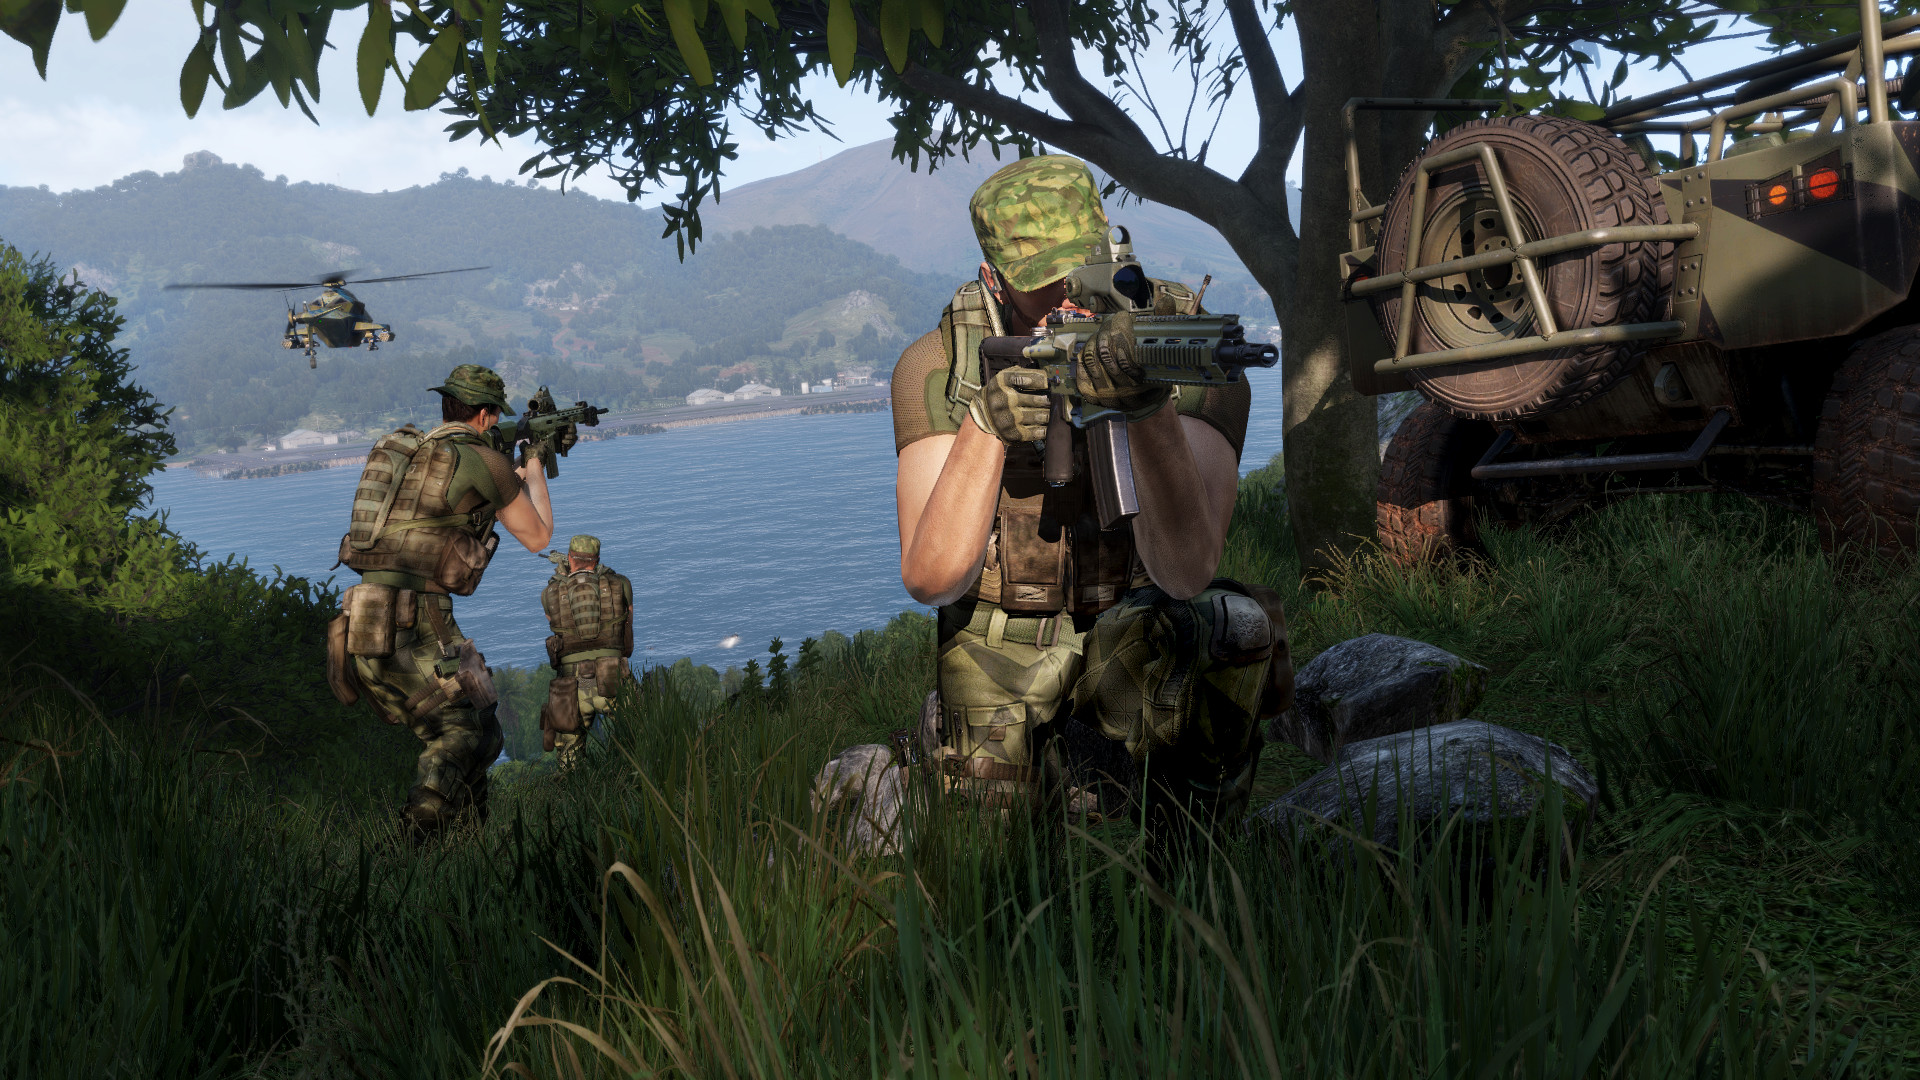 Best war games: Arma 3. Image shows soldiers walking around in the jungle.